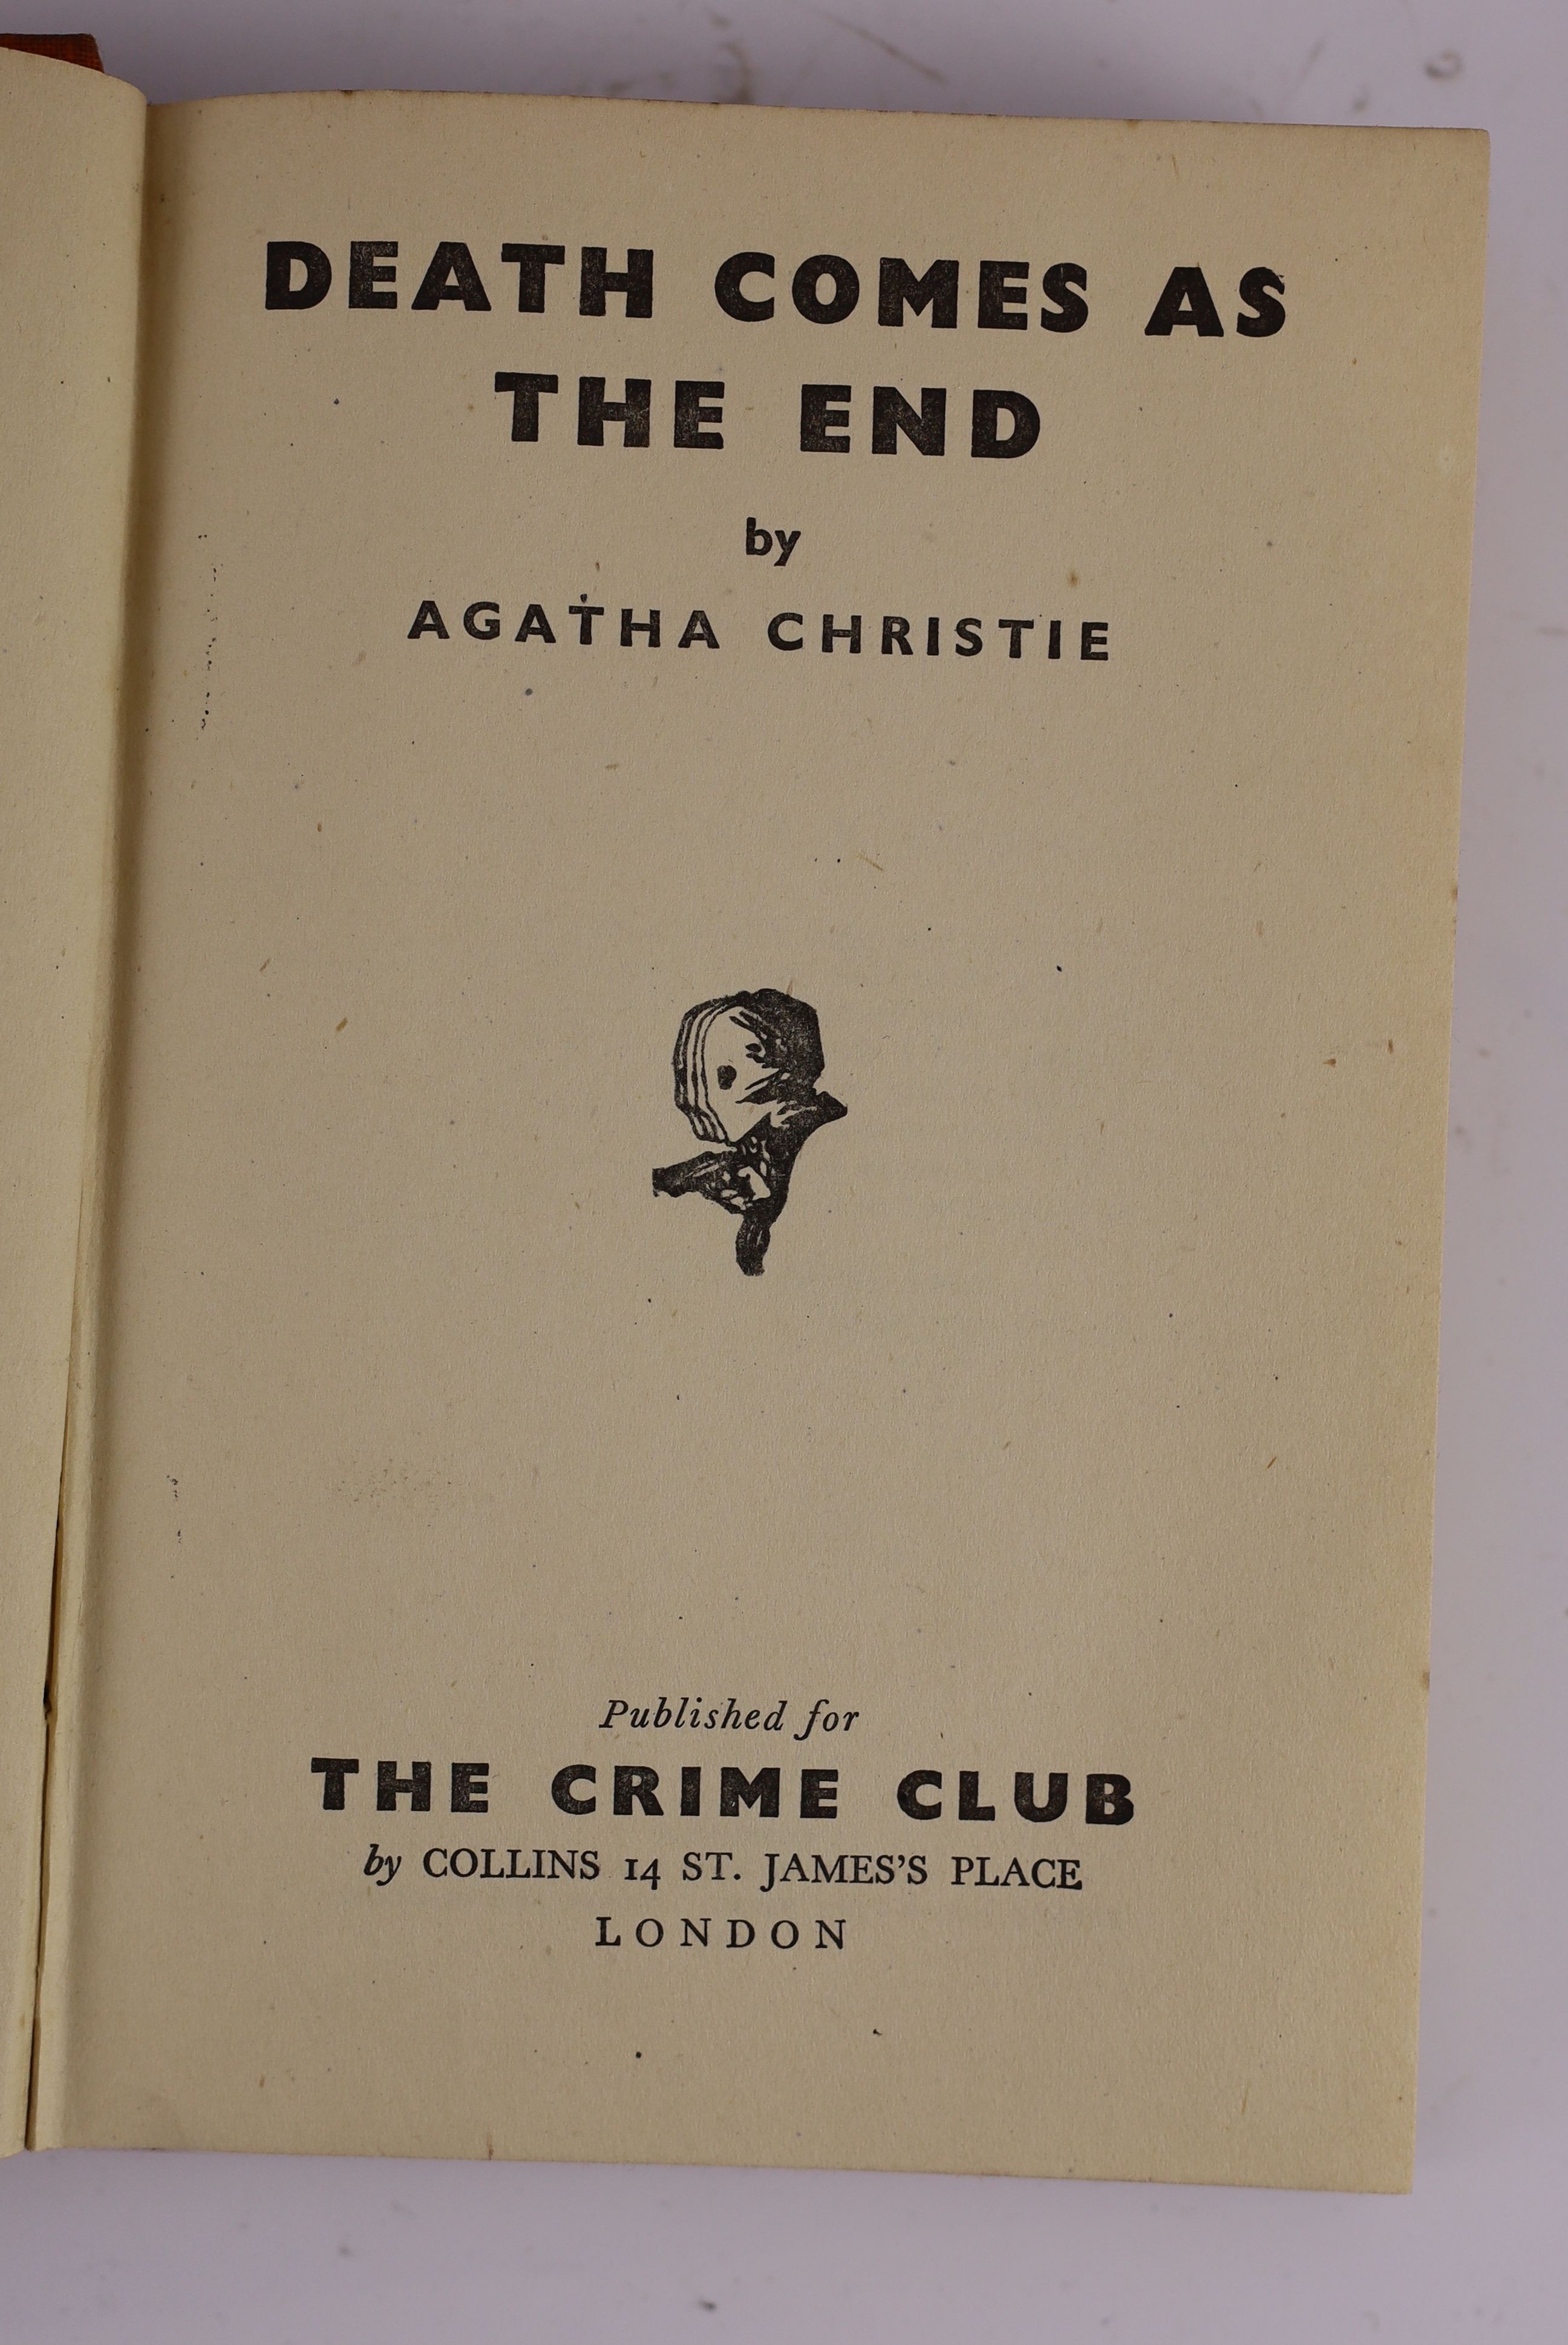 Christie, Agatha - Death Comes At The End, 1st edition